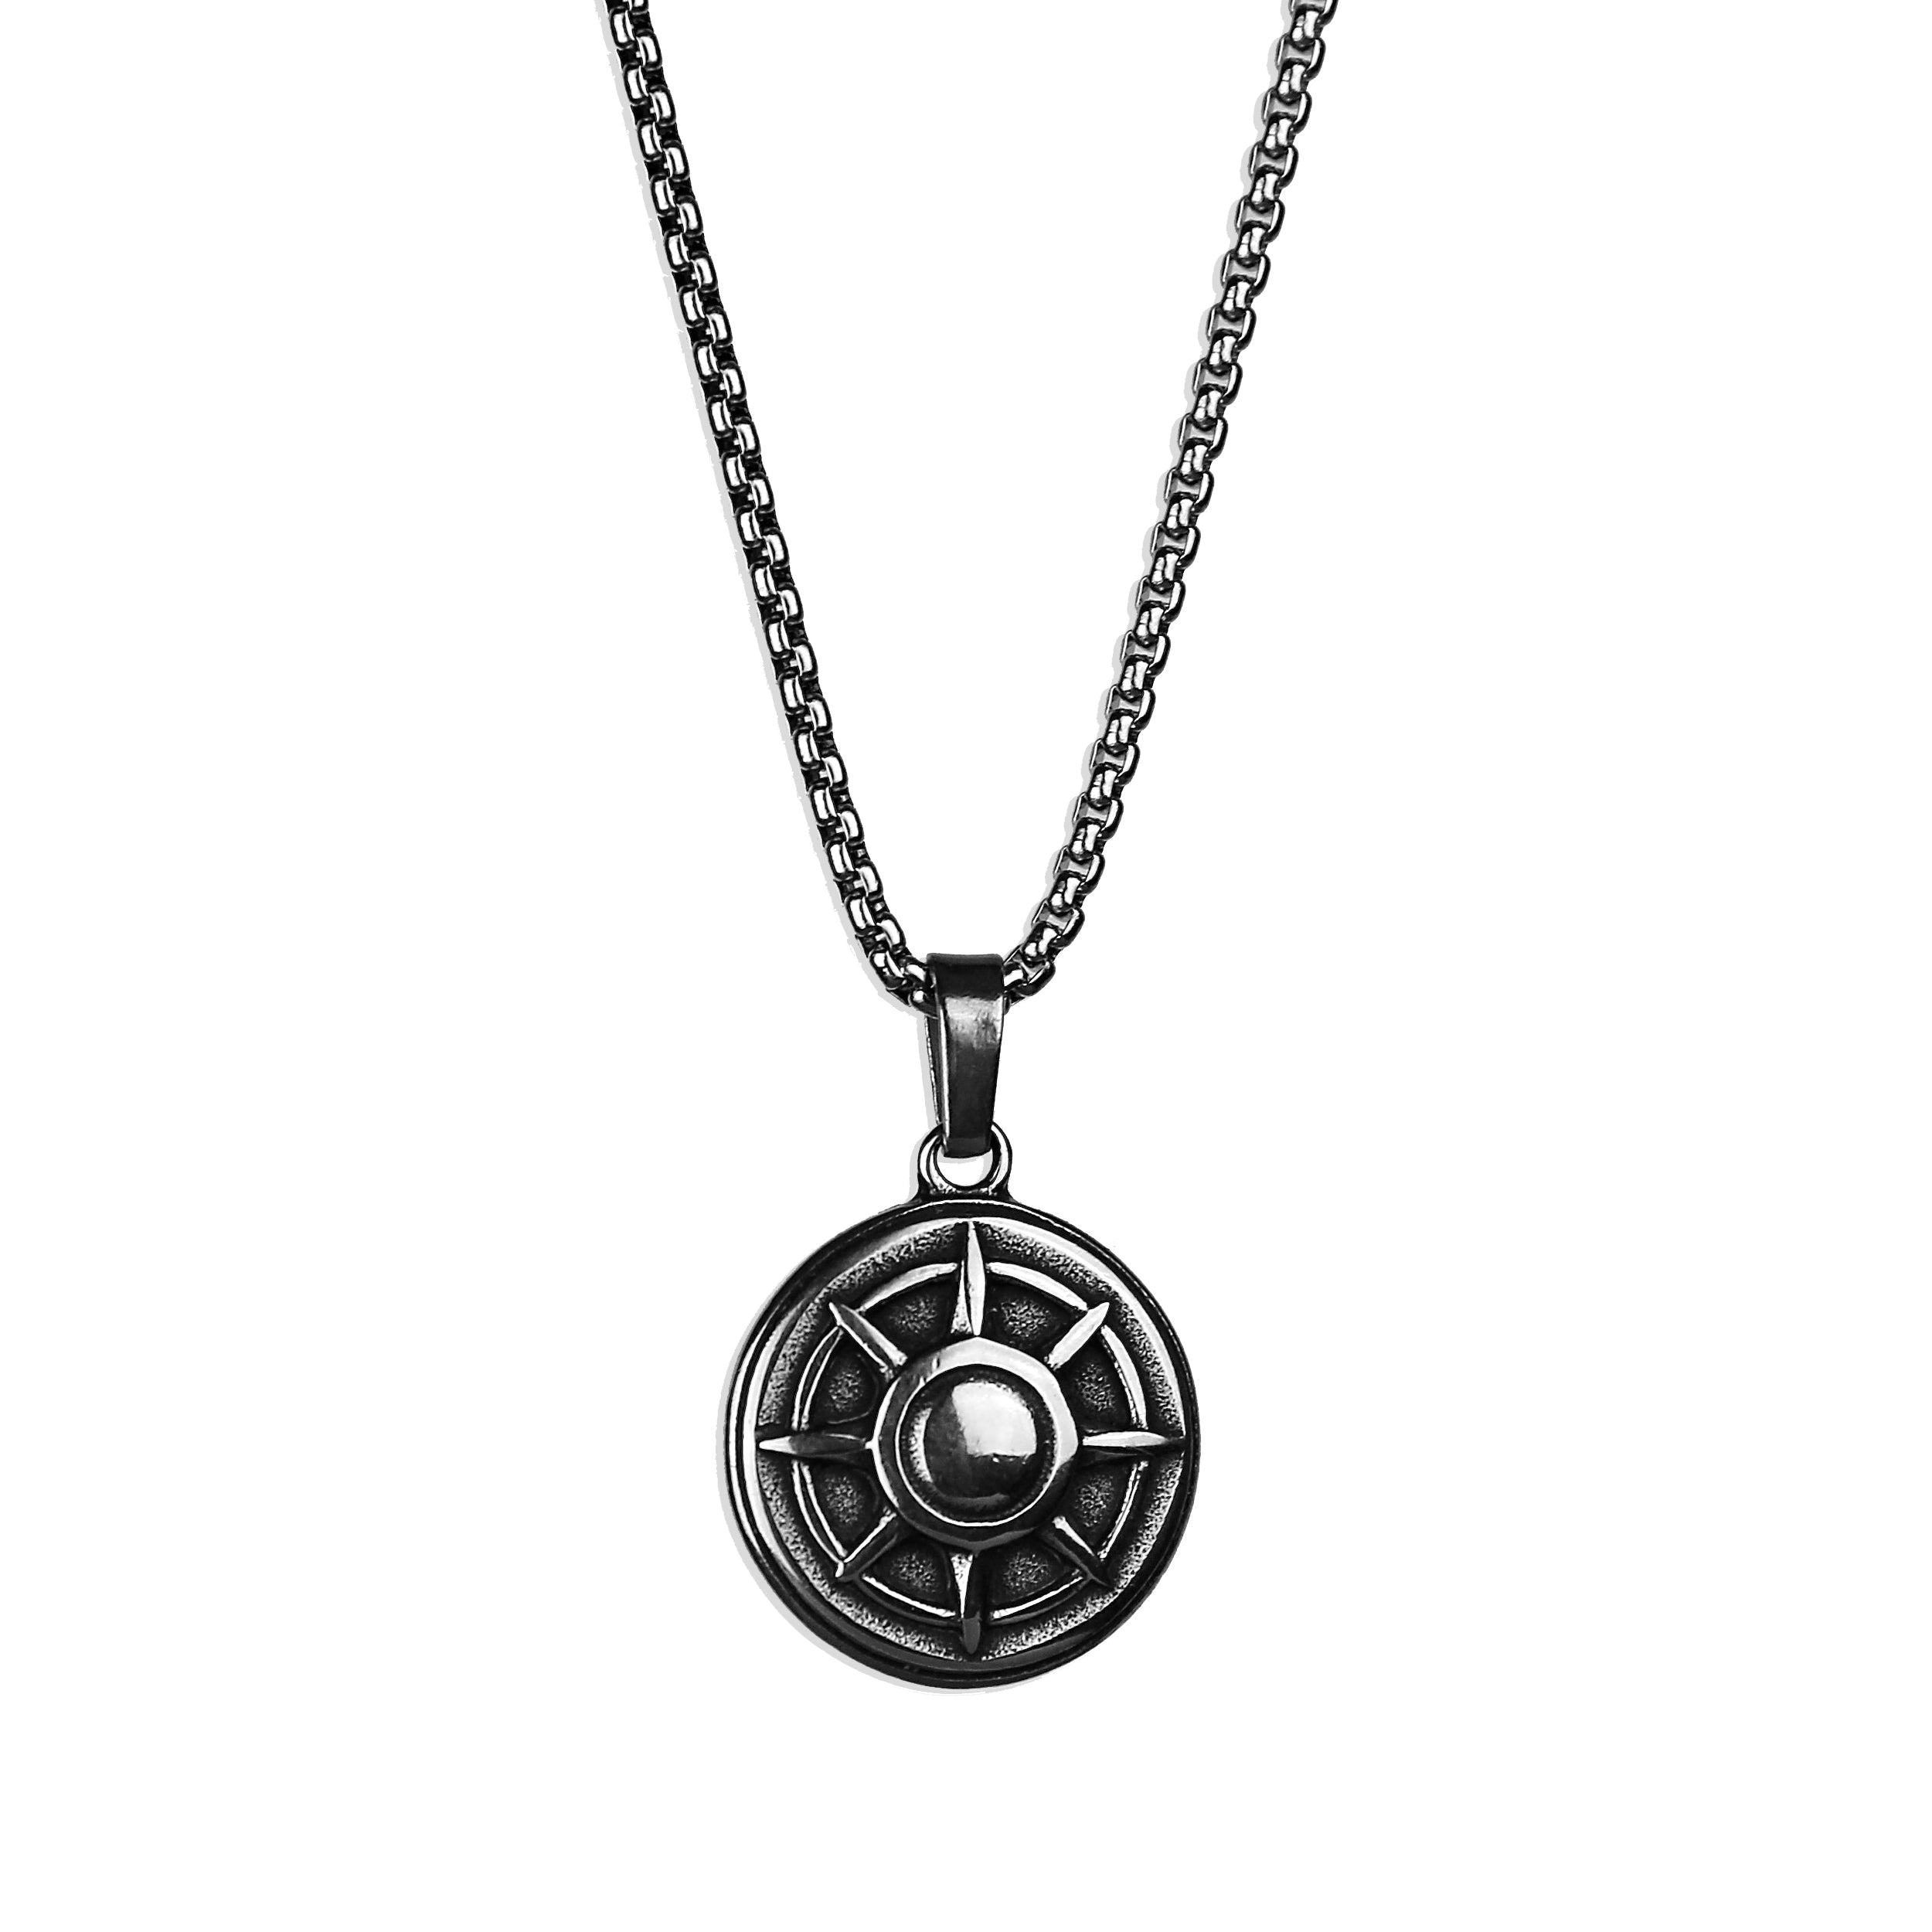 Seeker Compass Necklace - Silver